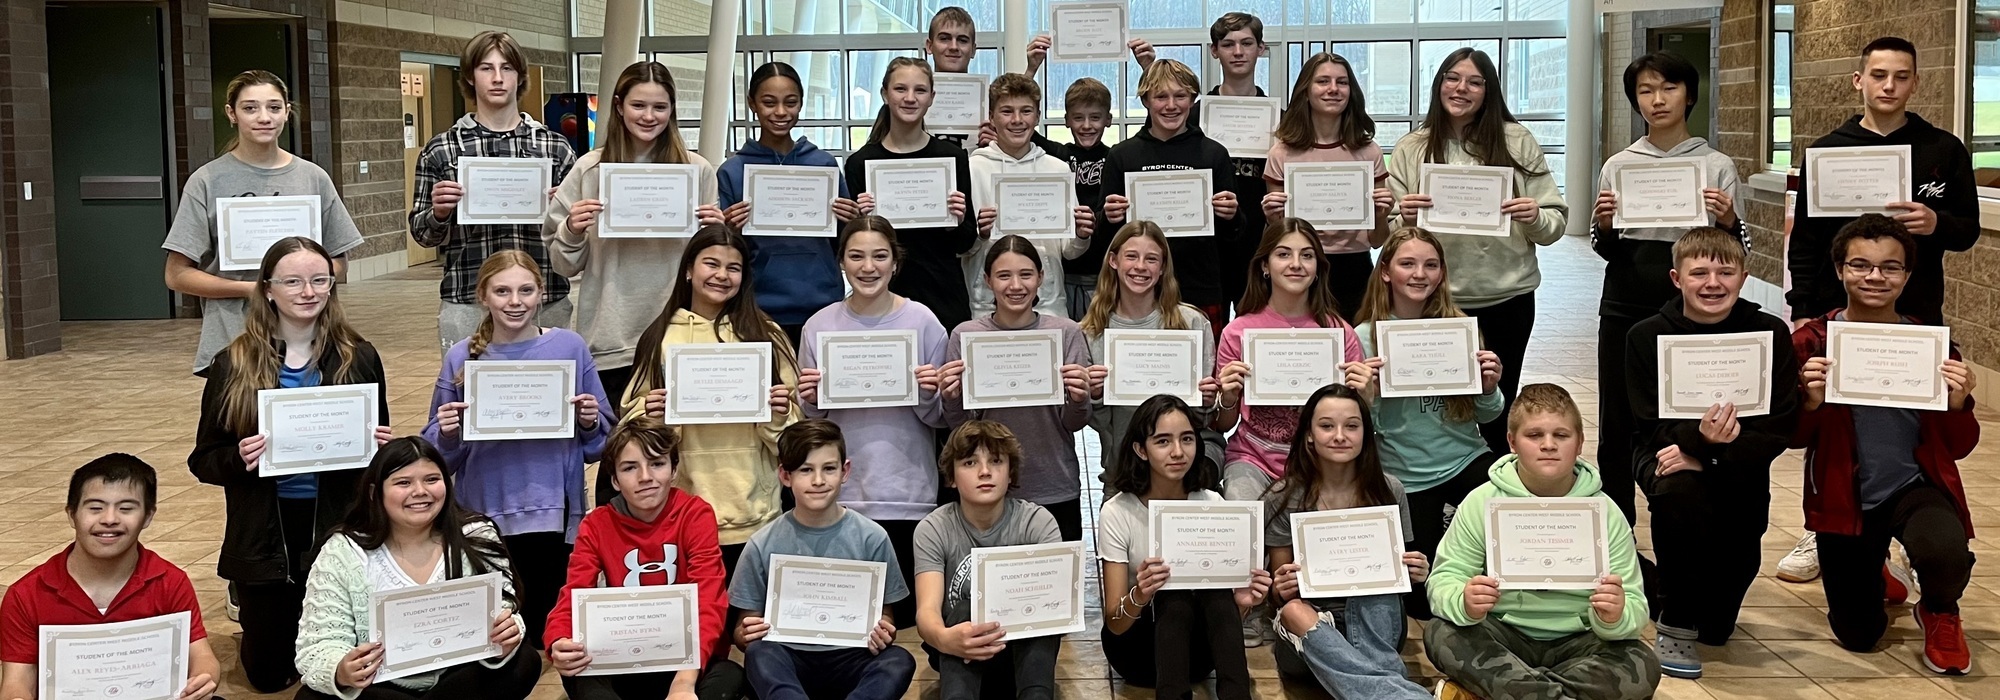 These students were honored as Students of the Month